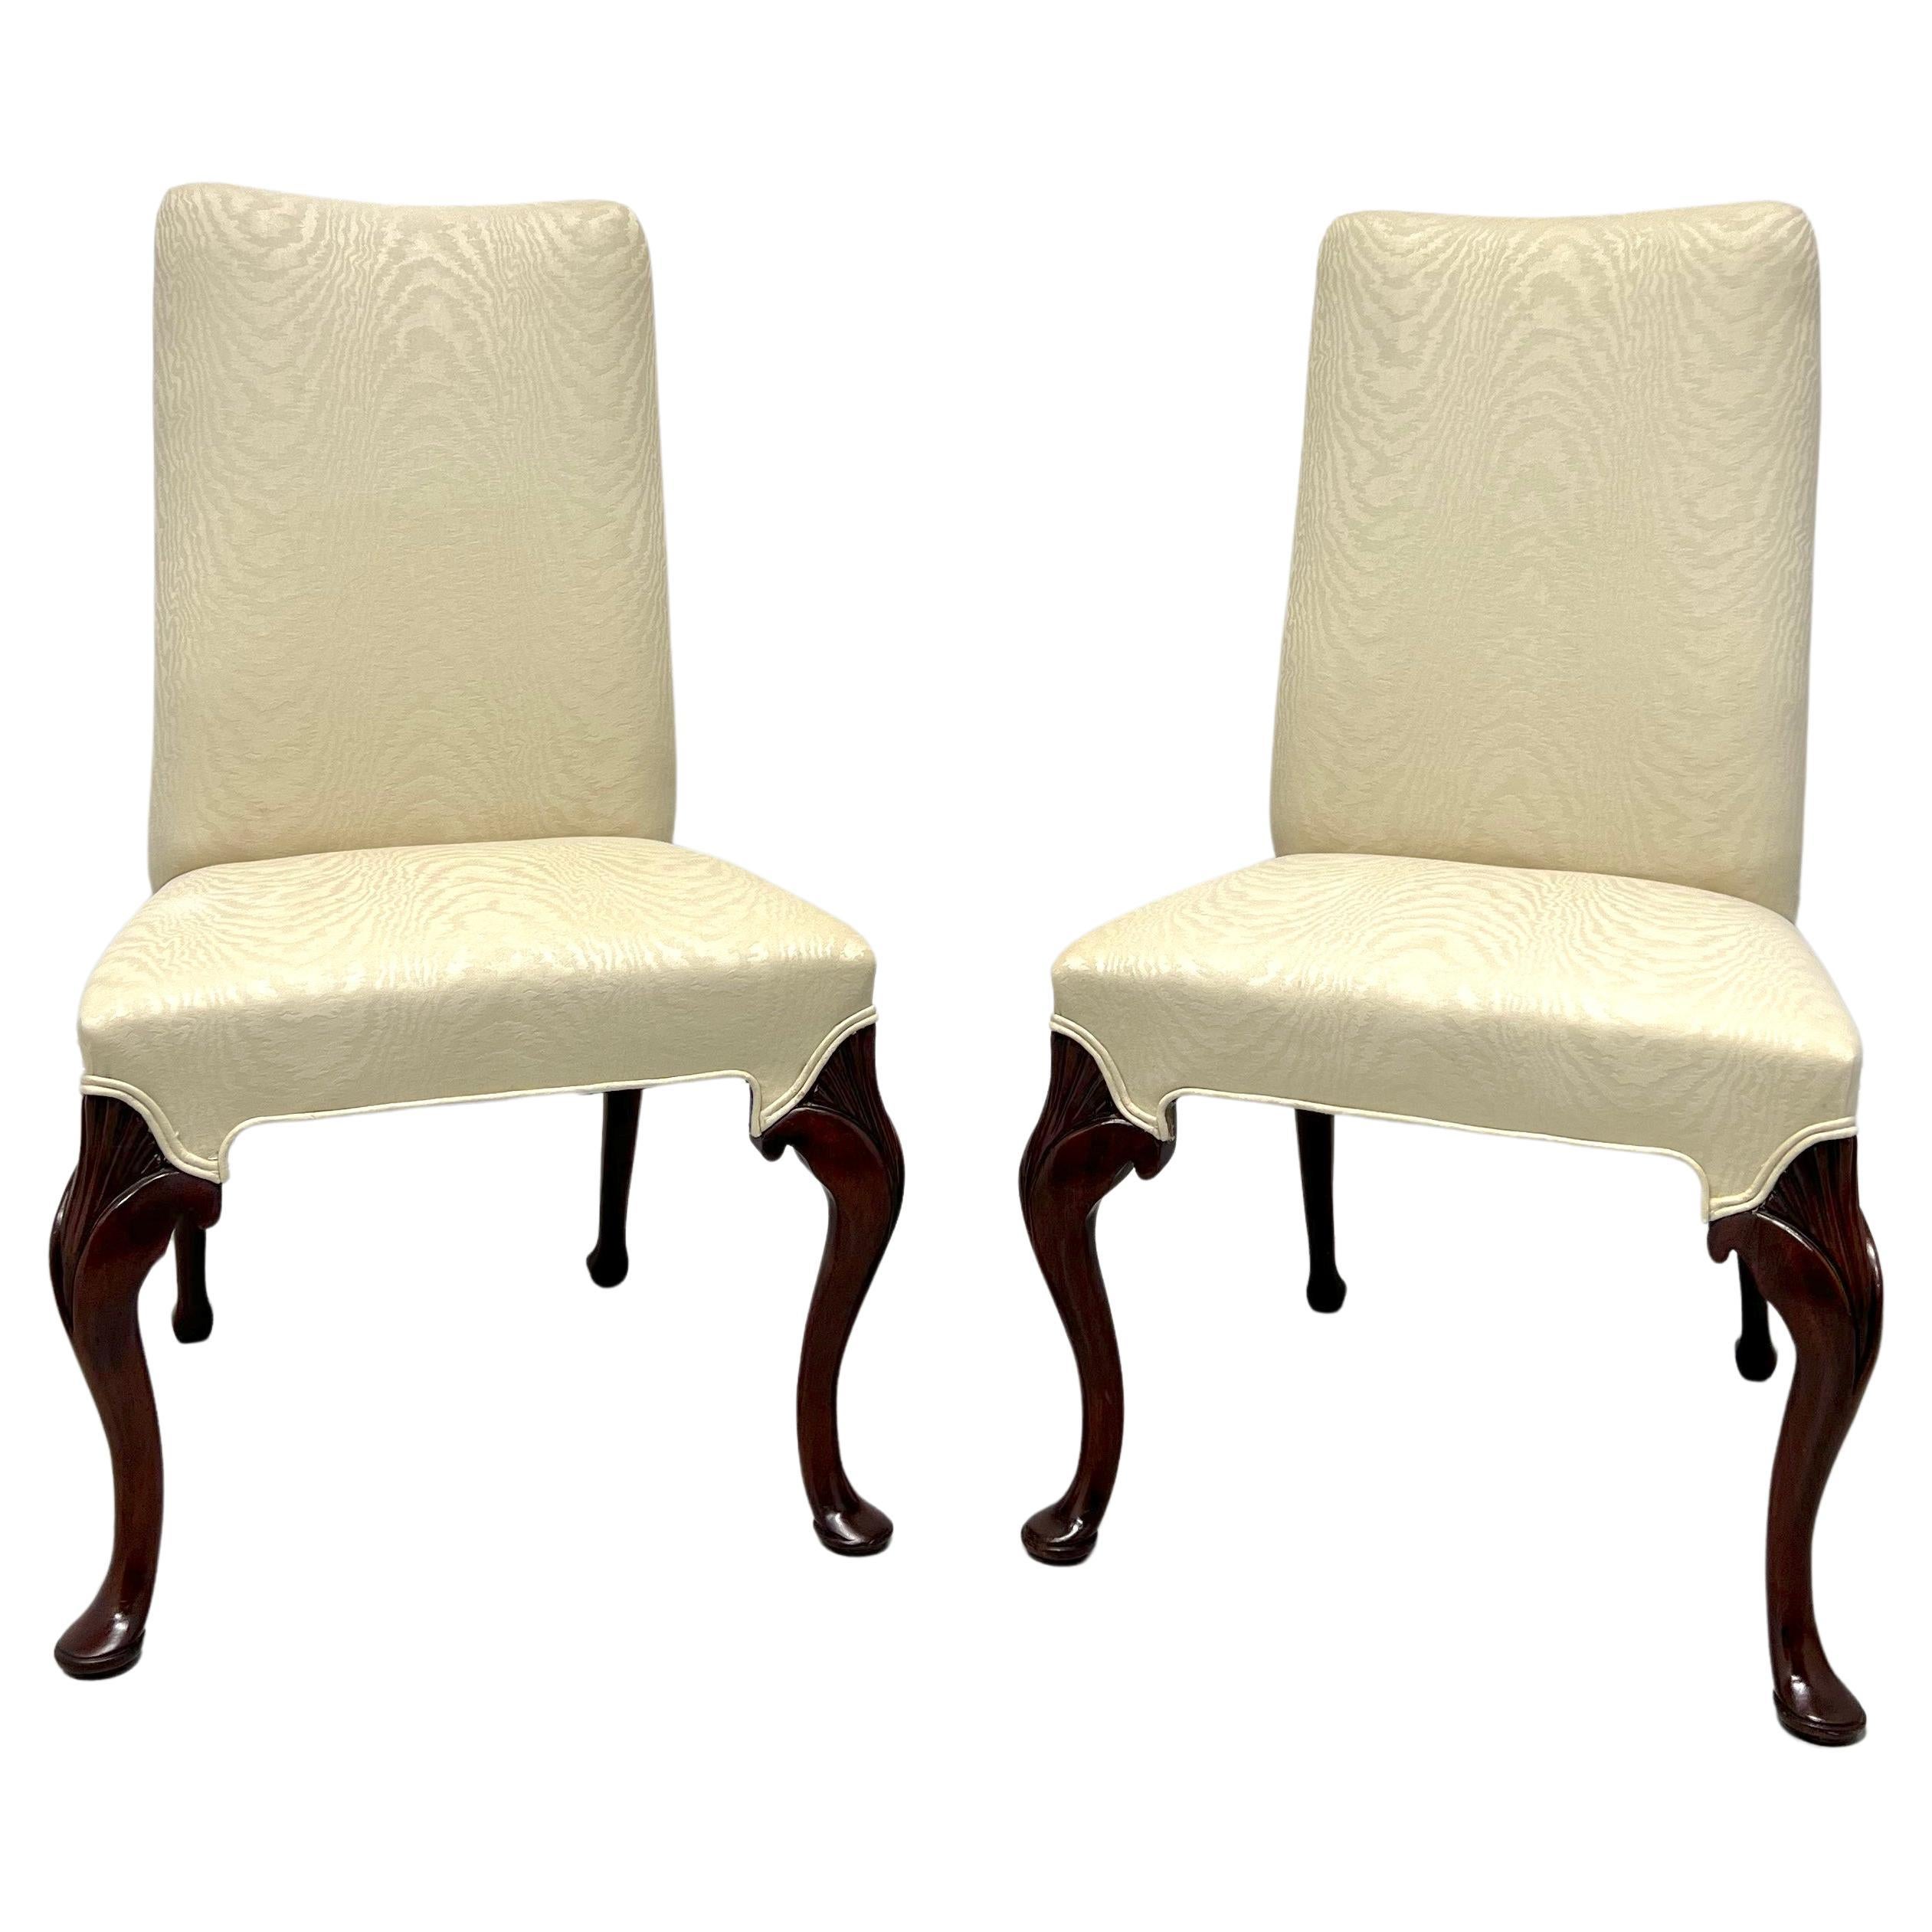 Late 20th Century Mahogany Frame French Provincial Parsons Chairs - Pair